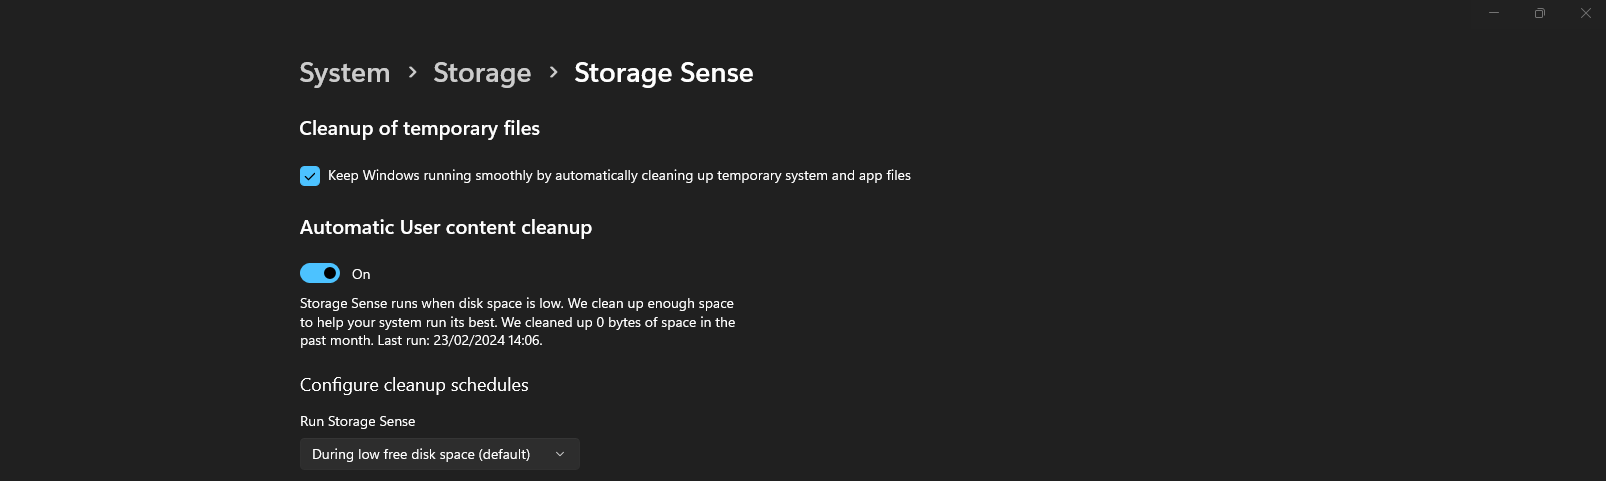 How to configure Storage Sense with Microsoft Intune